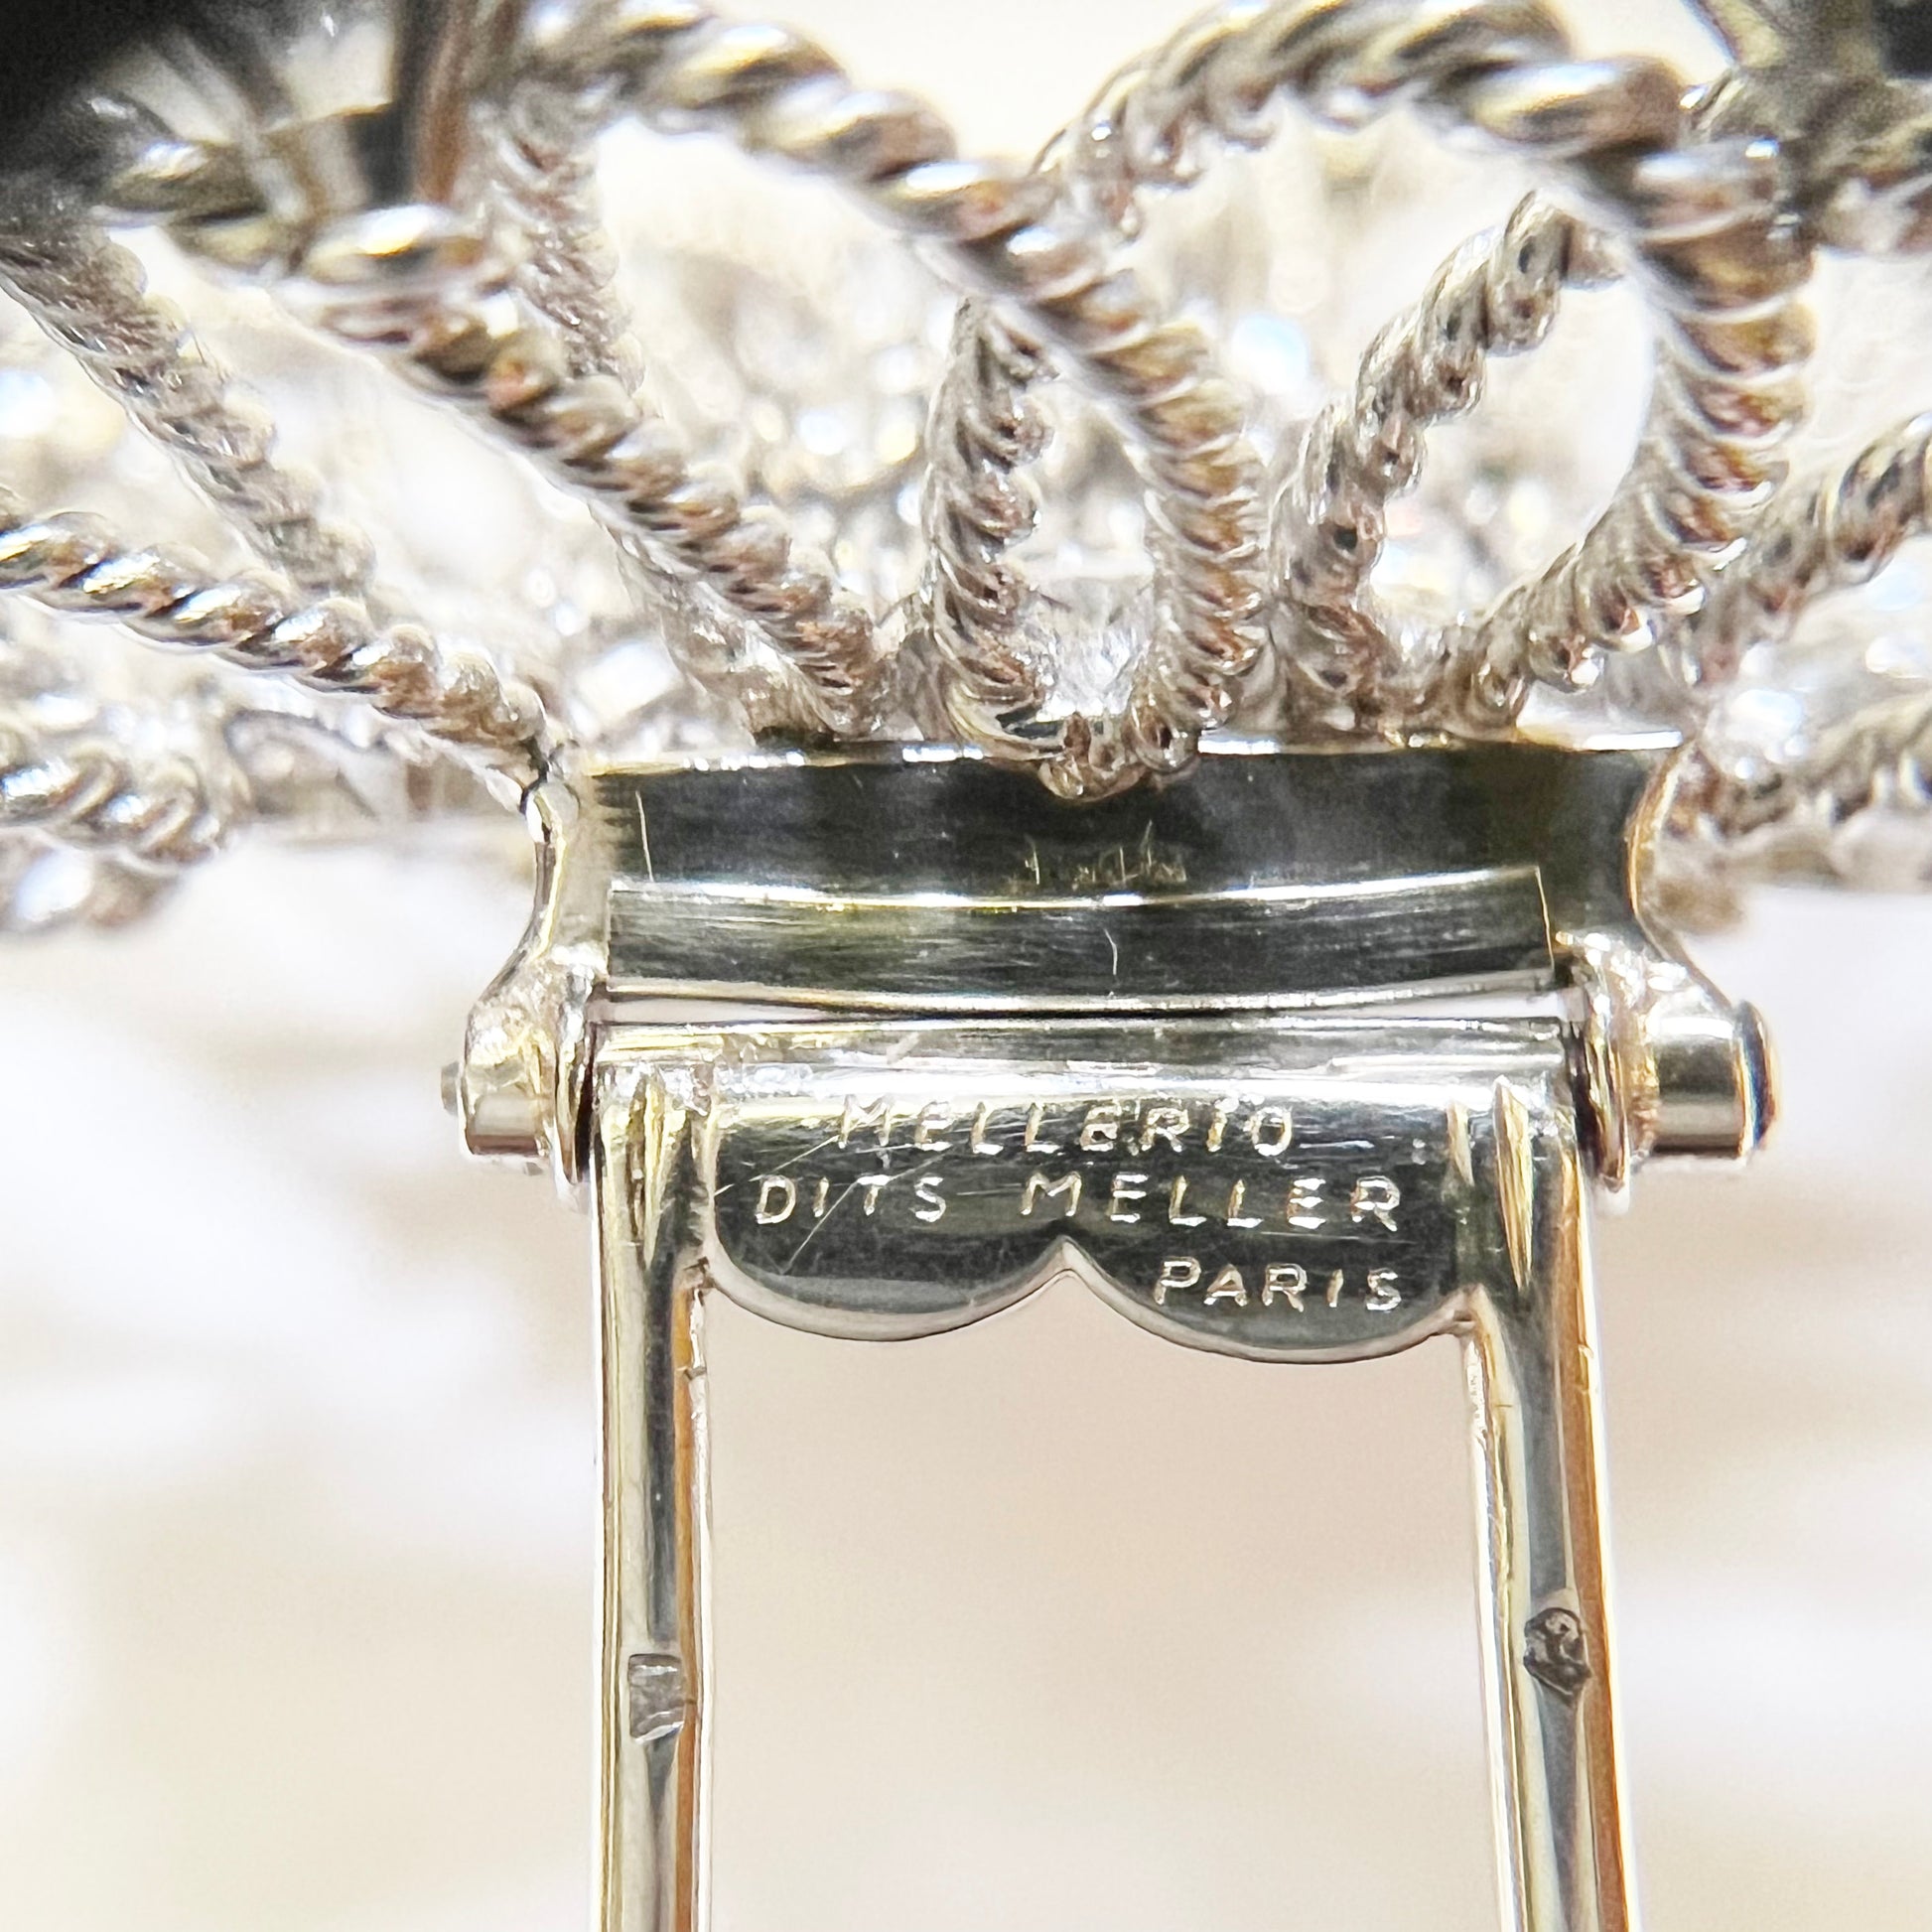 Mellerio French 1940s Platinum & 18KT Yellow Gold Diamond Brooch close-up details and signature